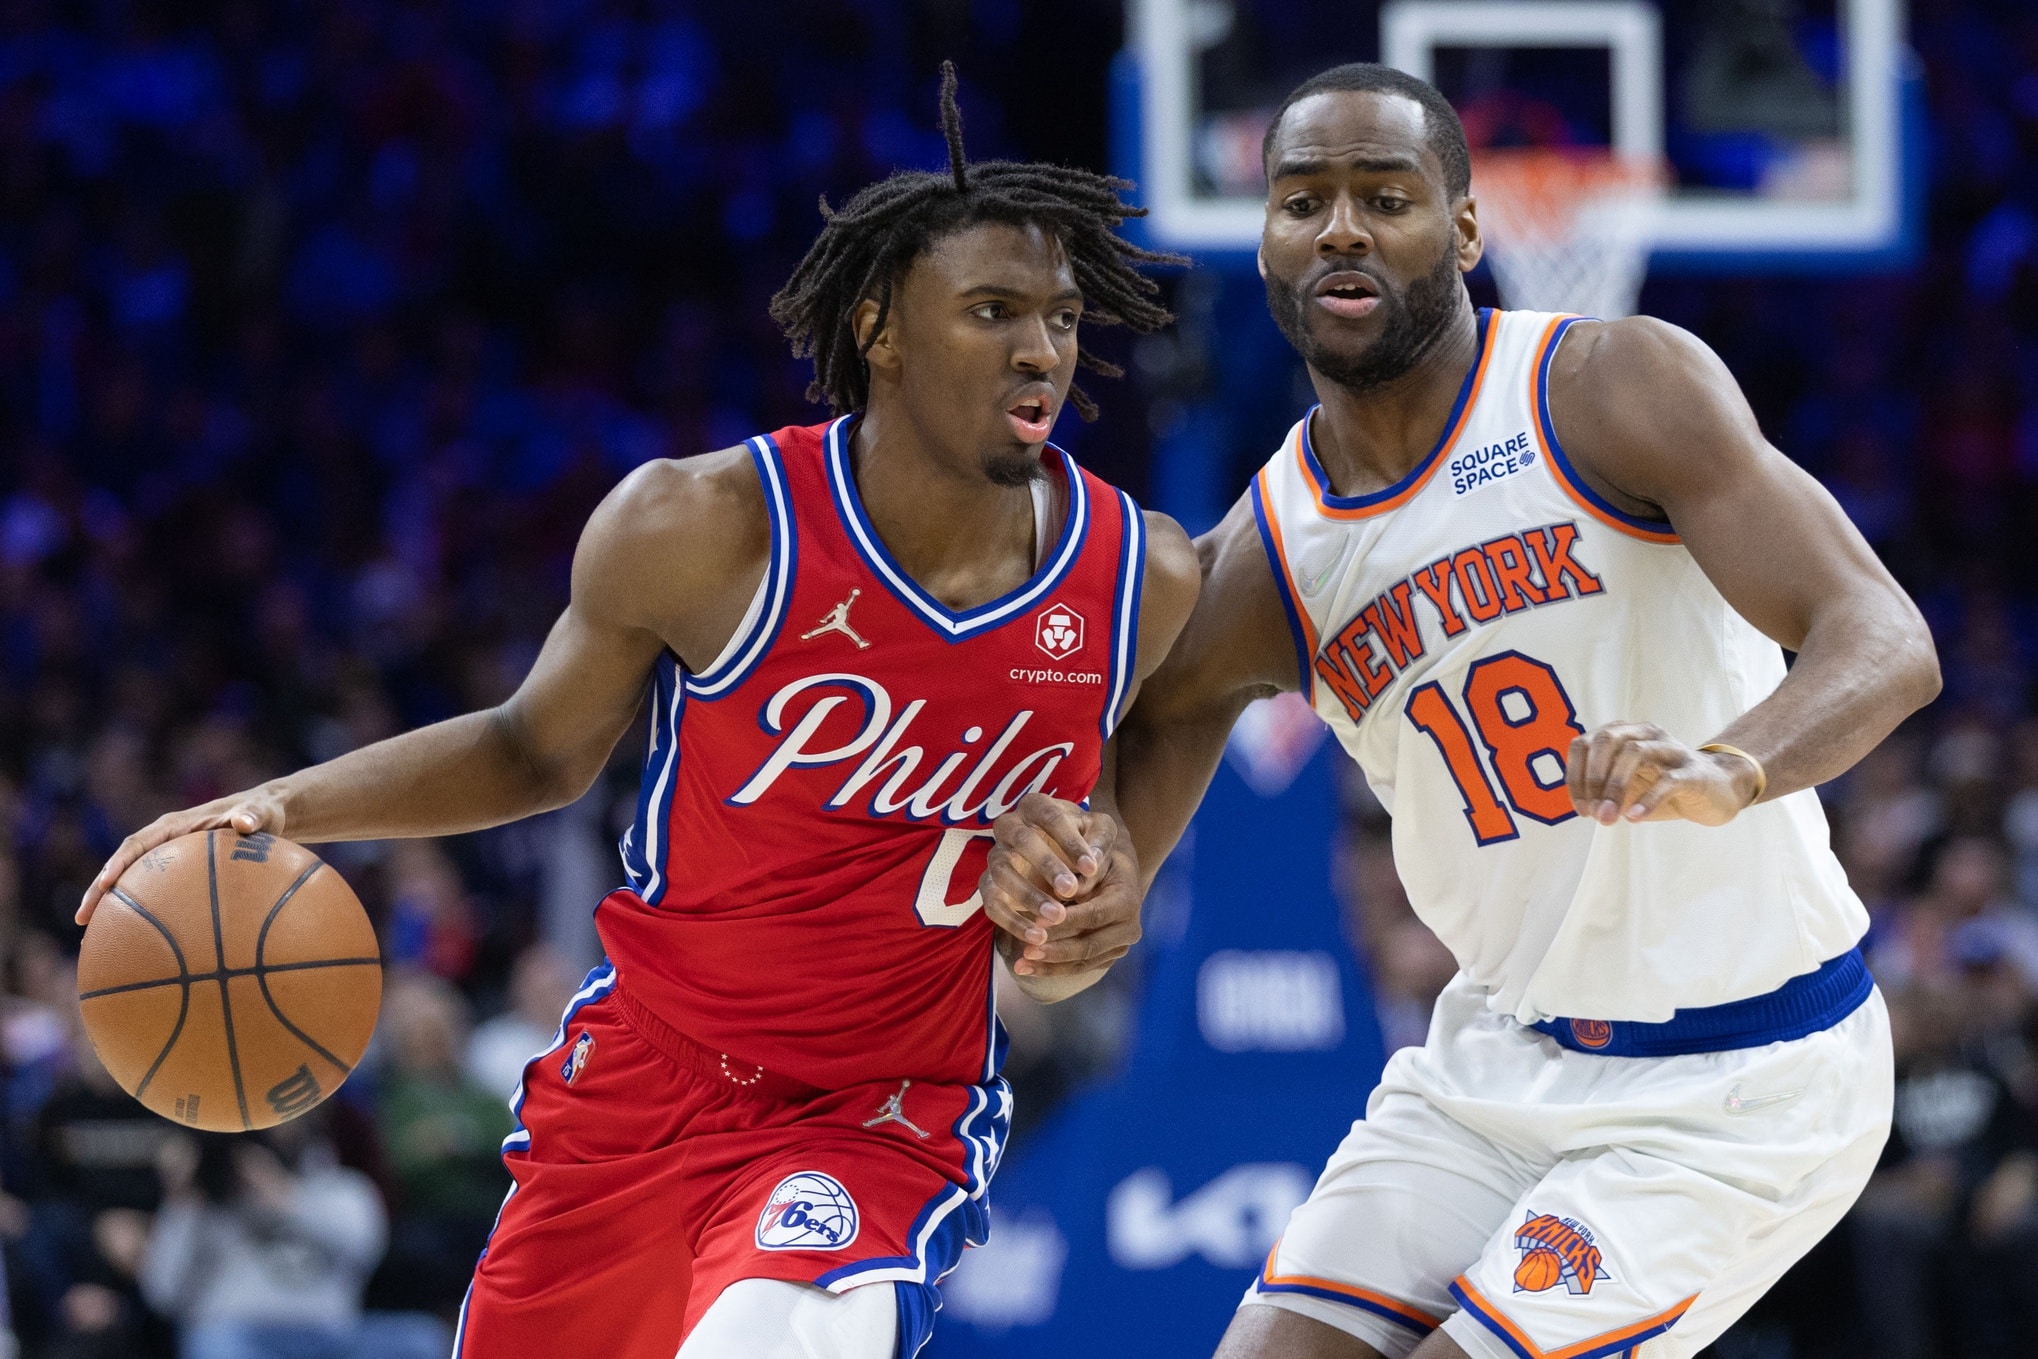 Sixers Will Play the Knicks on Christmas, One Day After the Eagles Wrap Up the Division